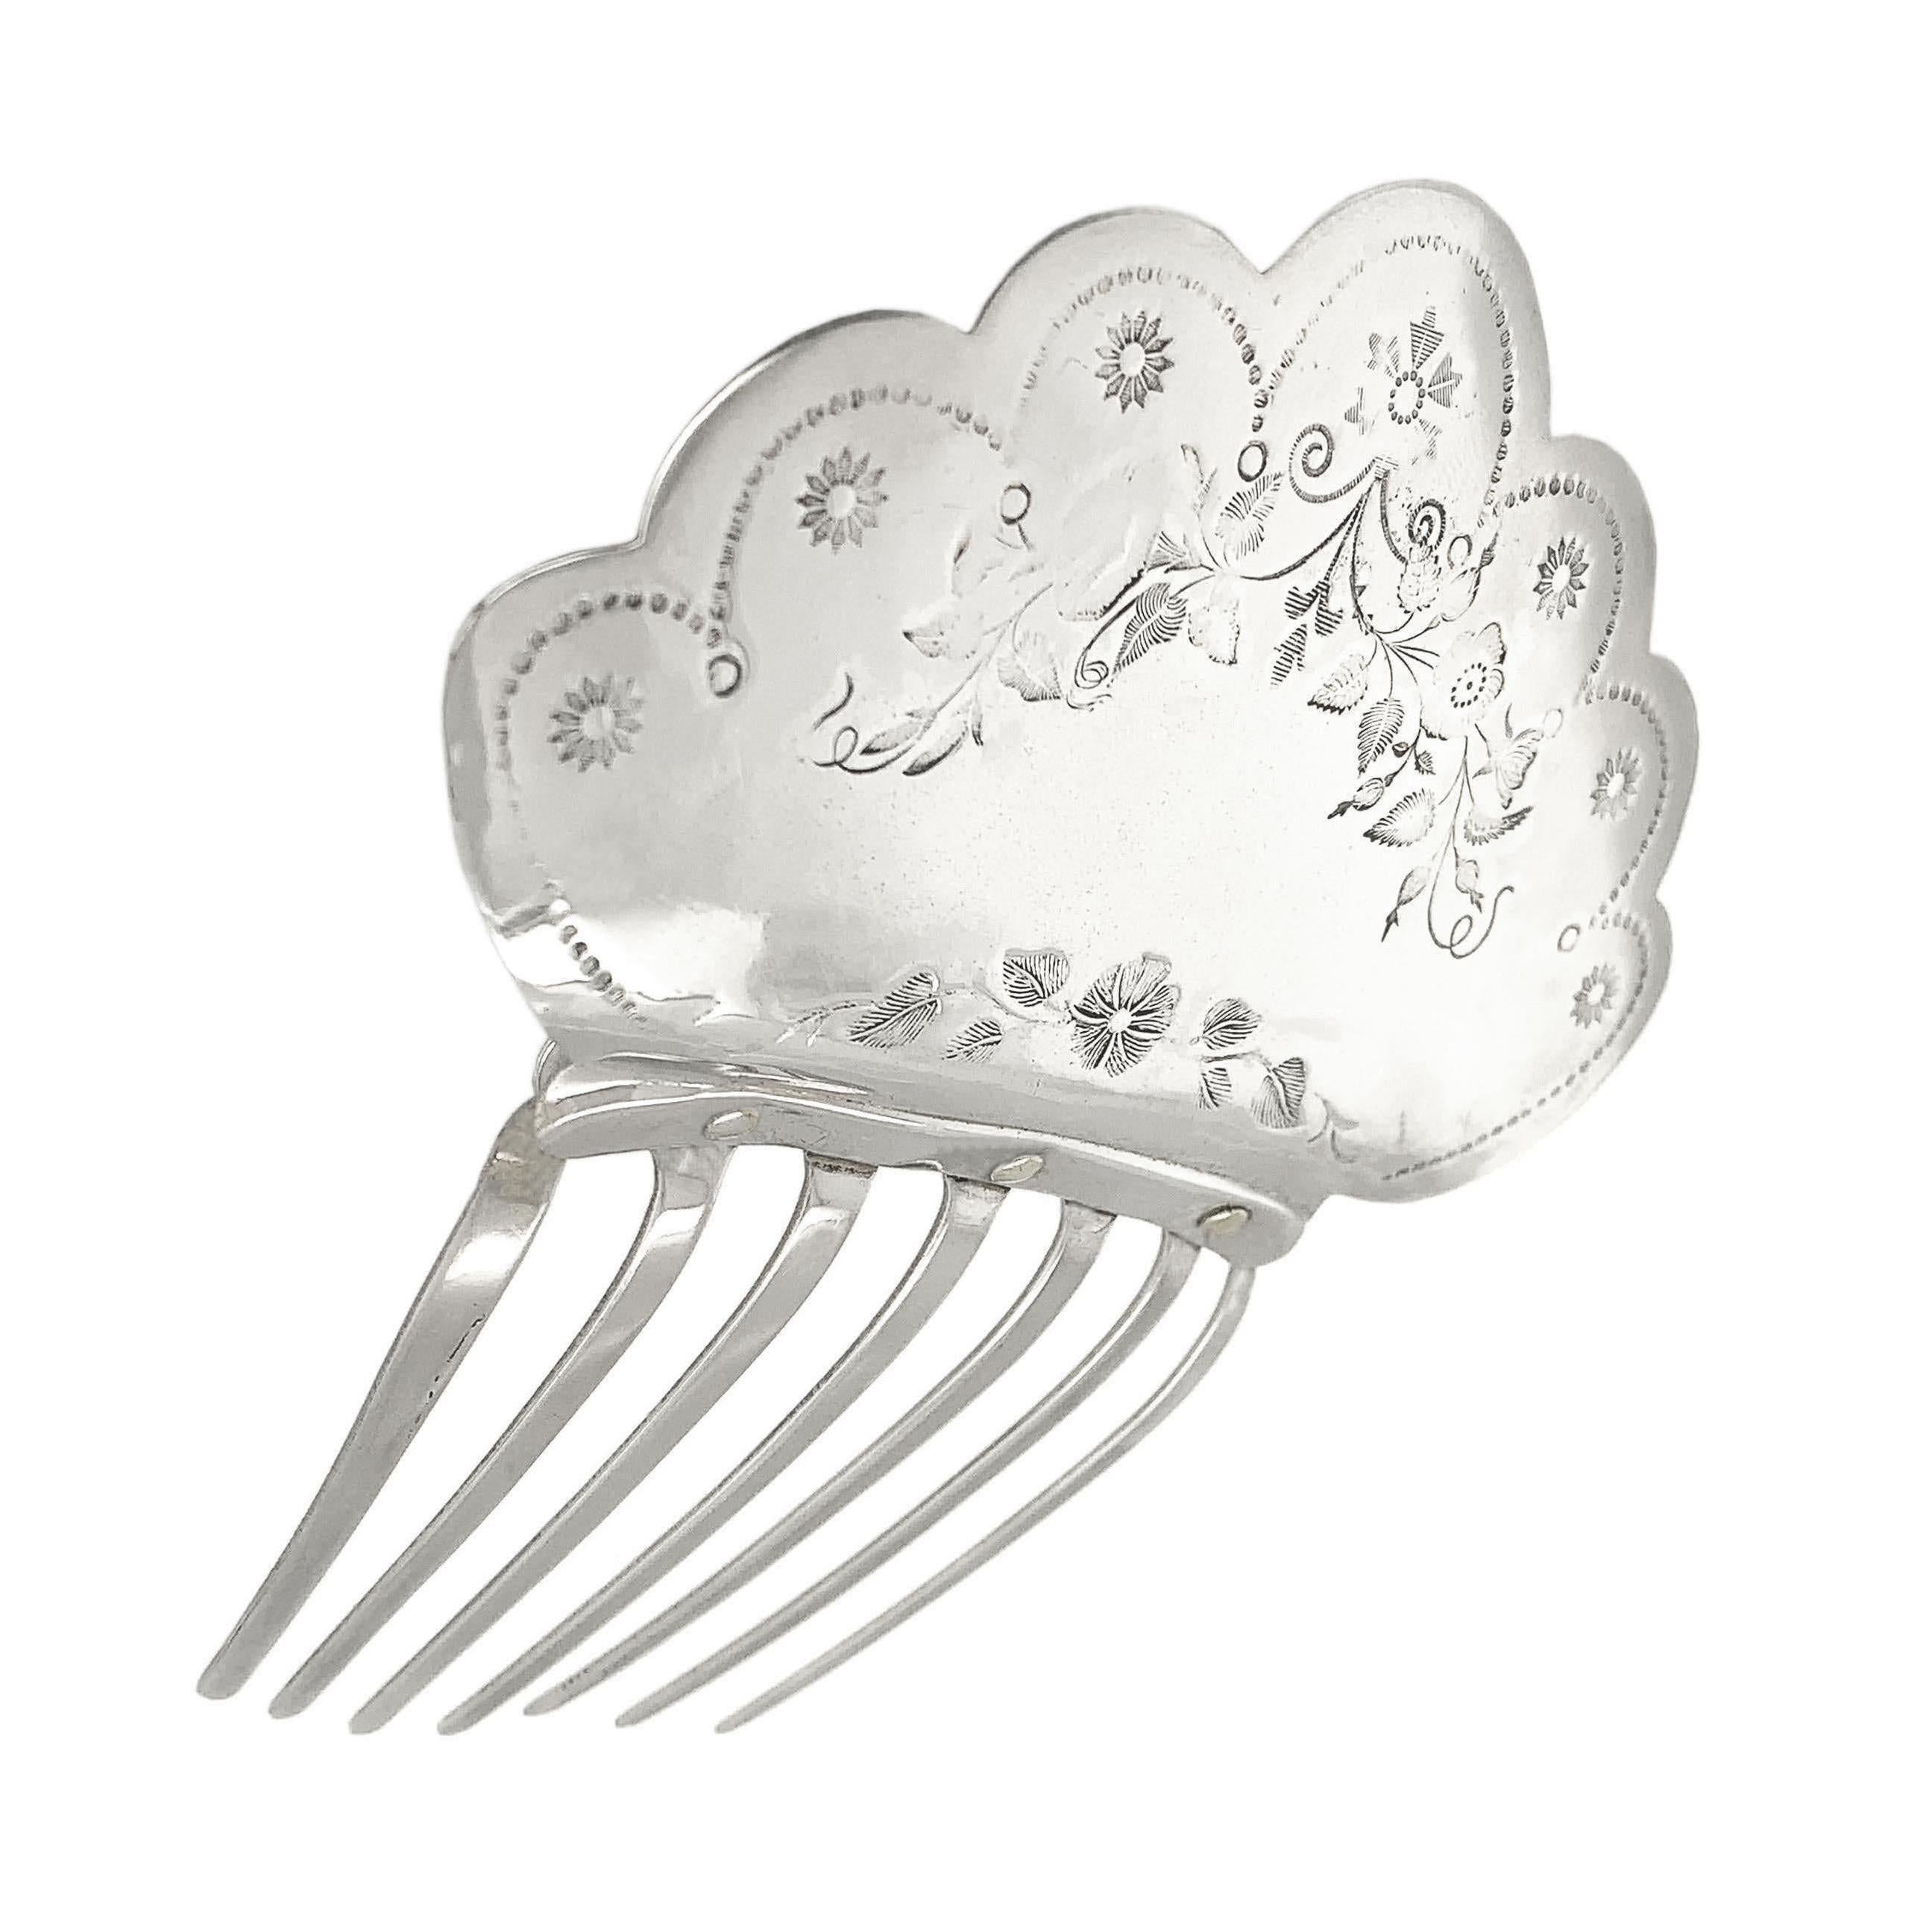 Large and glamorous Victorian hair comb.  Embellished with fine bright-cut engraved floral pattern.  Silver-plated.  4